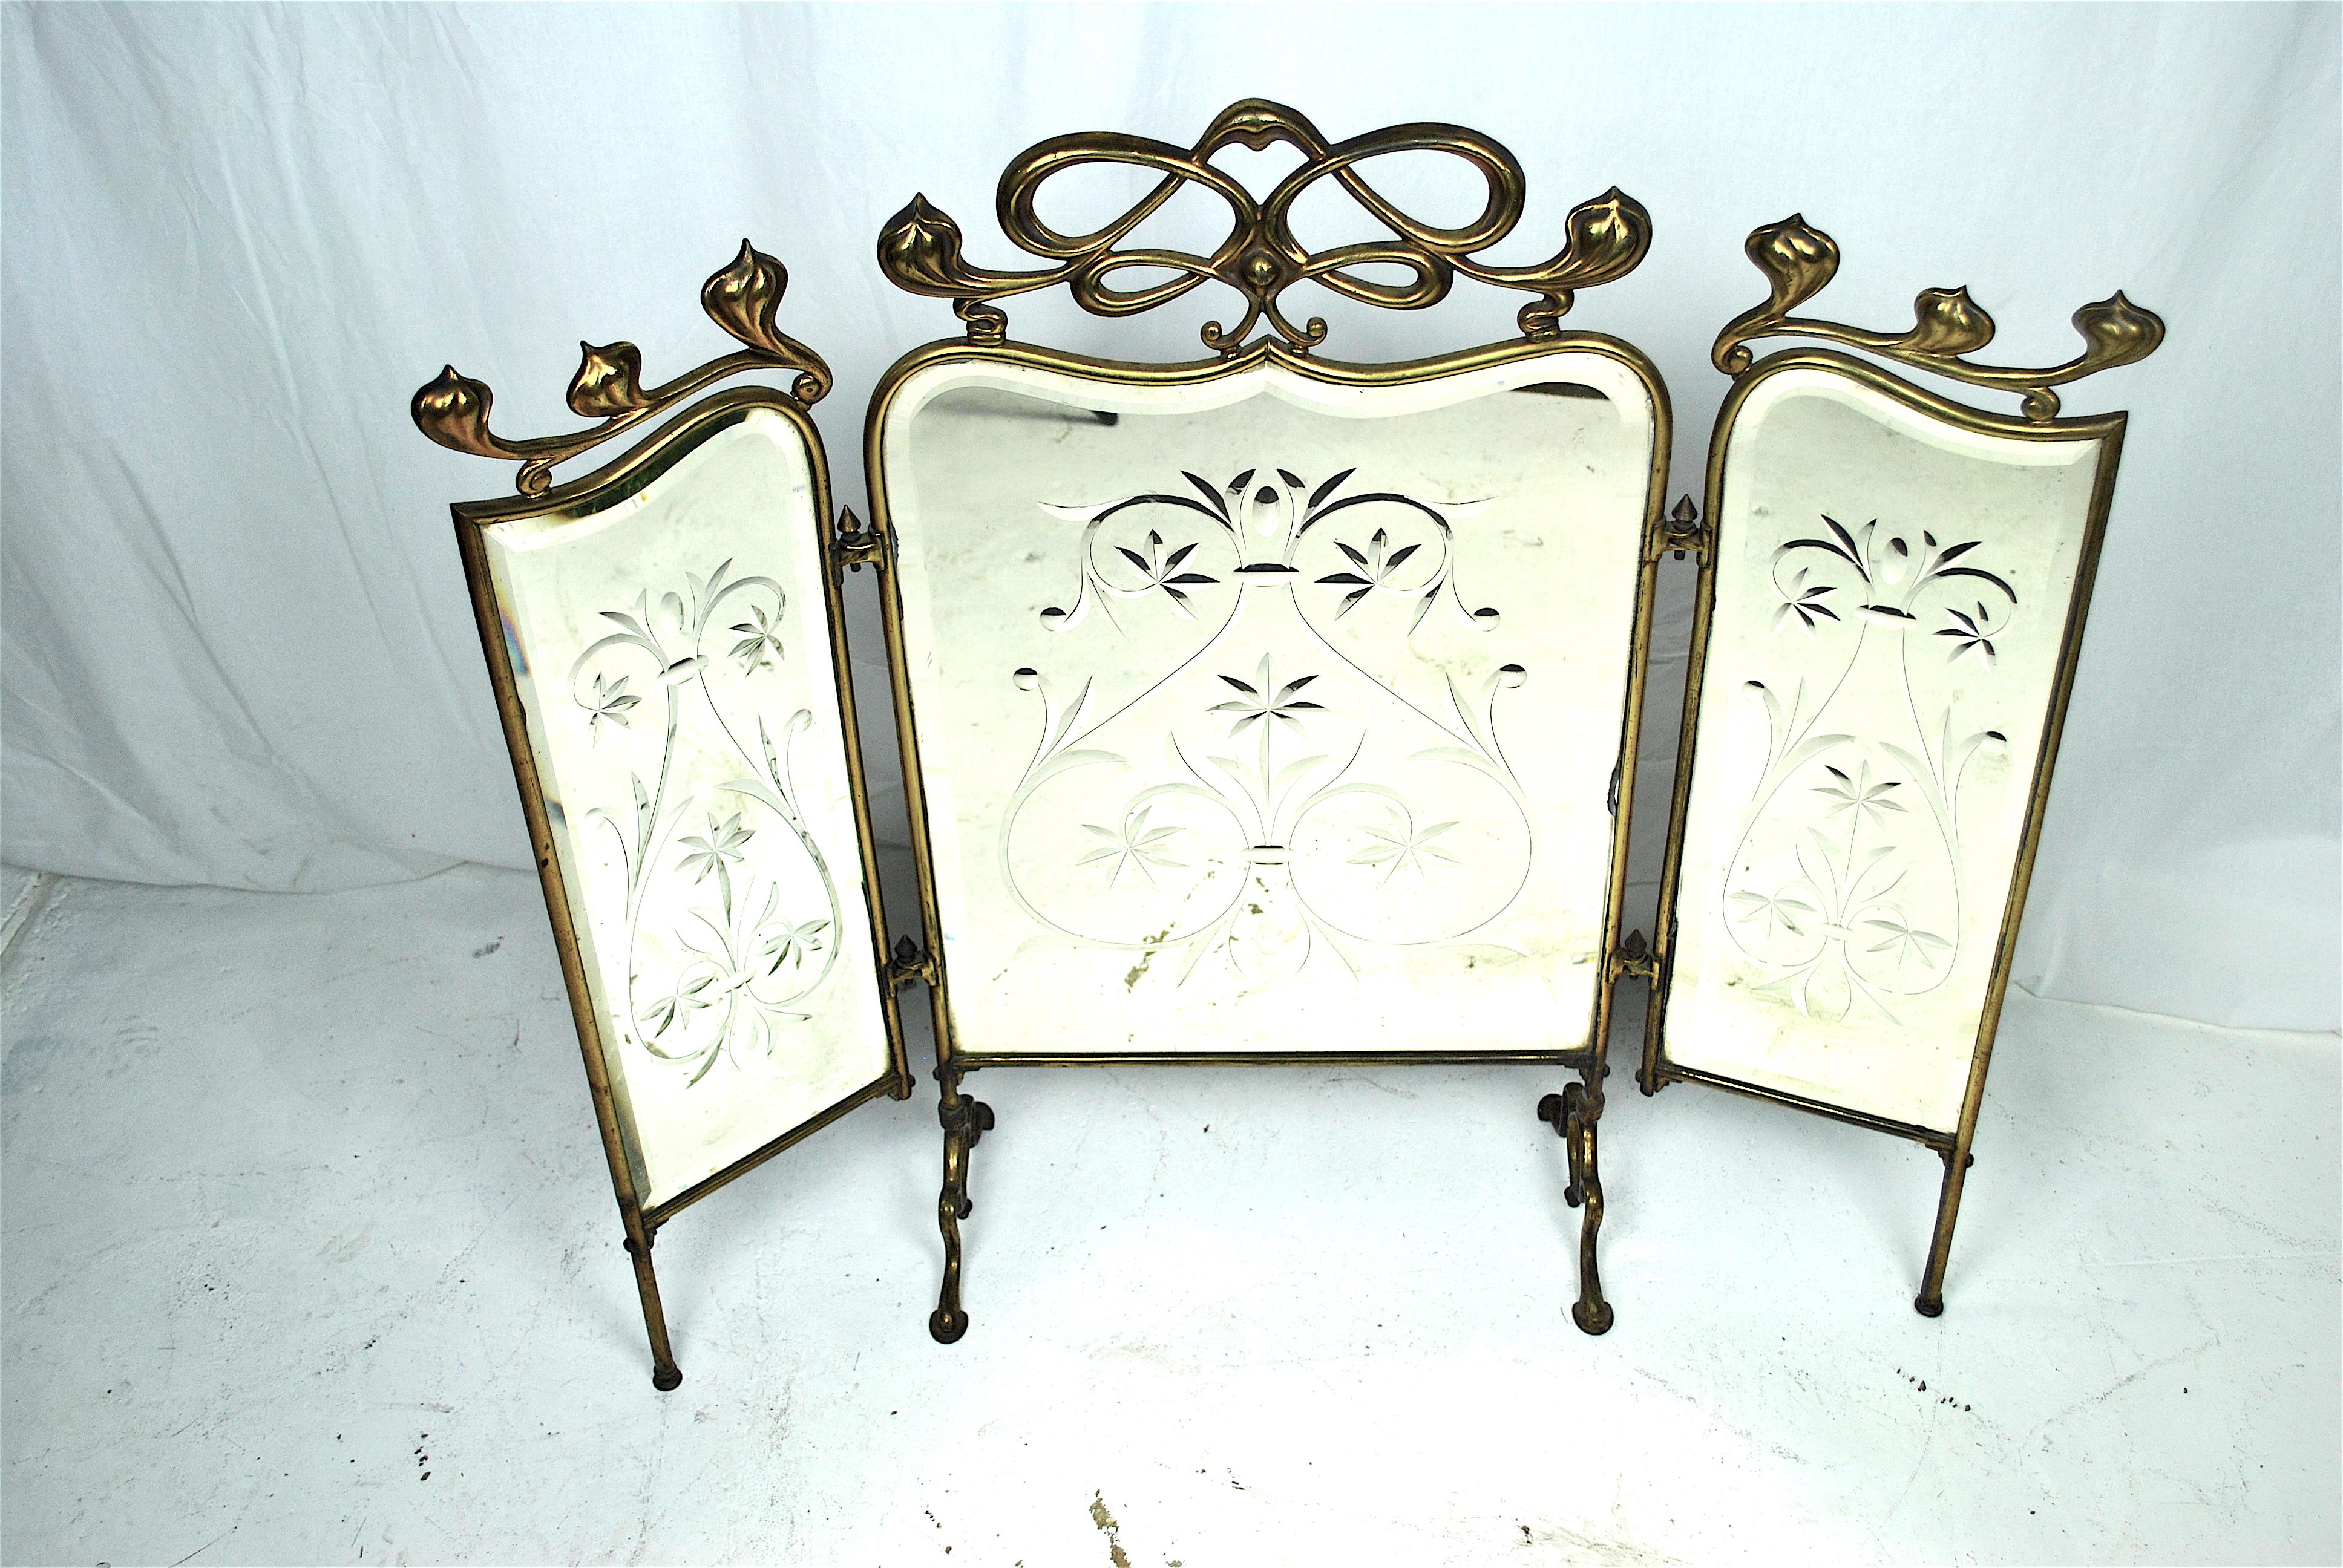 French Three-Piece Mirrored Art Nouveau Fire Fender Screen